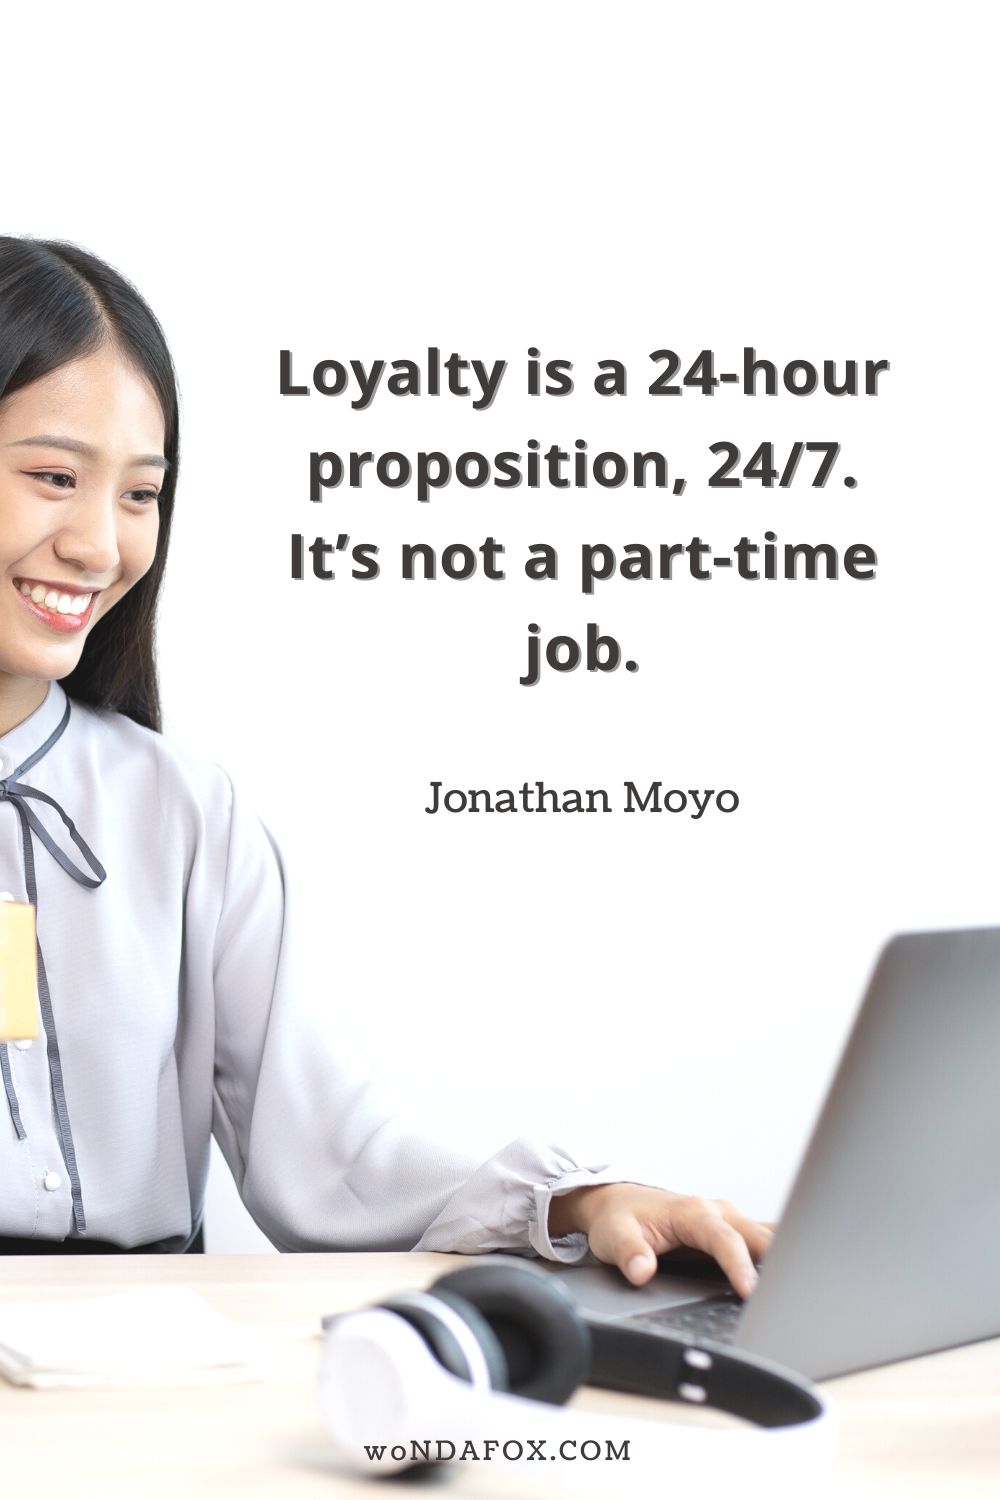 “Loyalty is a 24-hour proposition, 24/7. It’s not a part-time job.” 